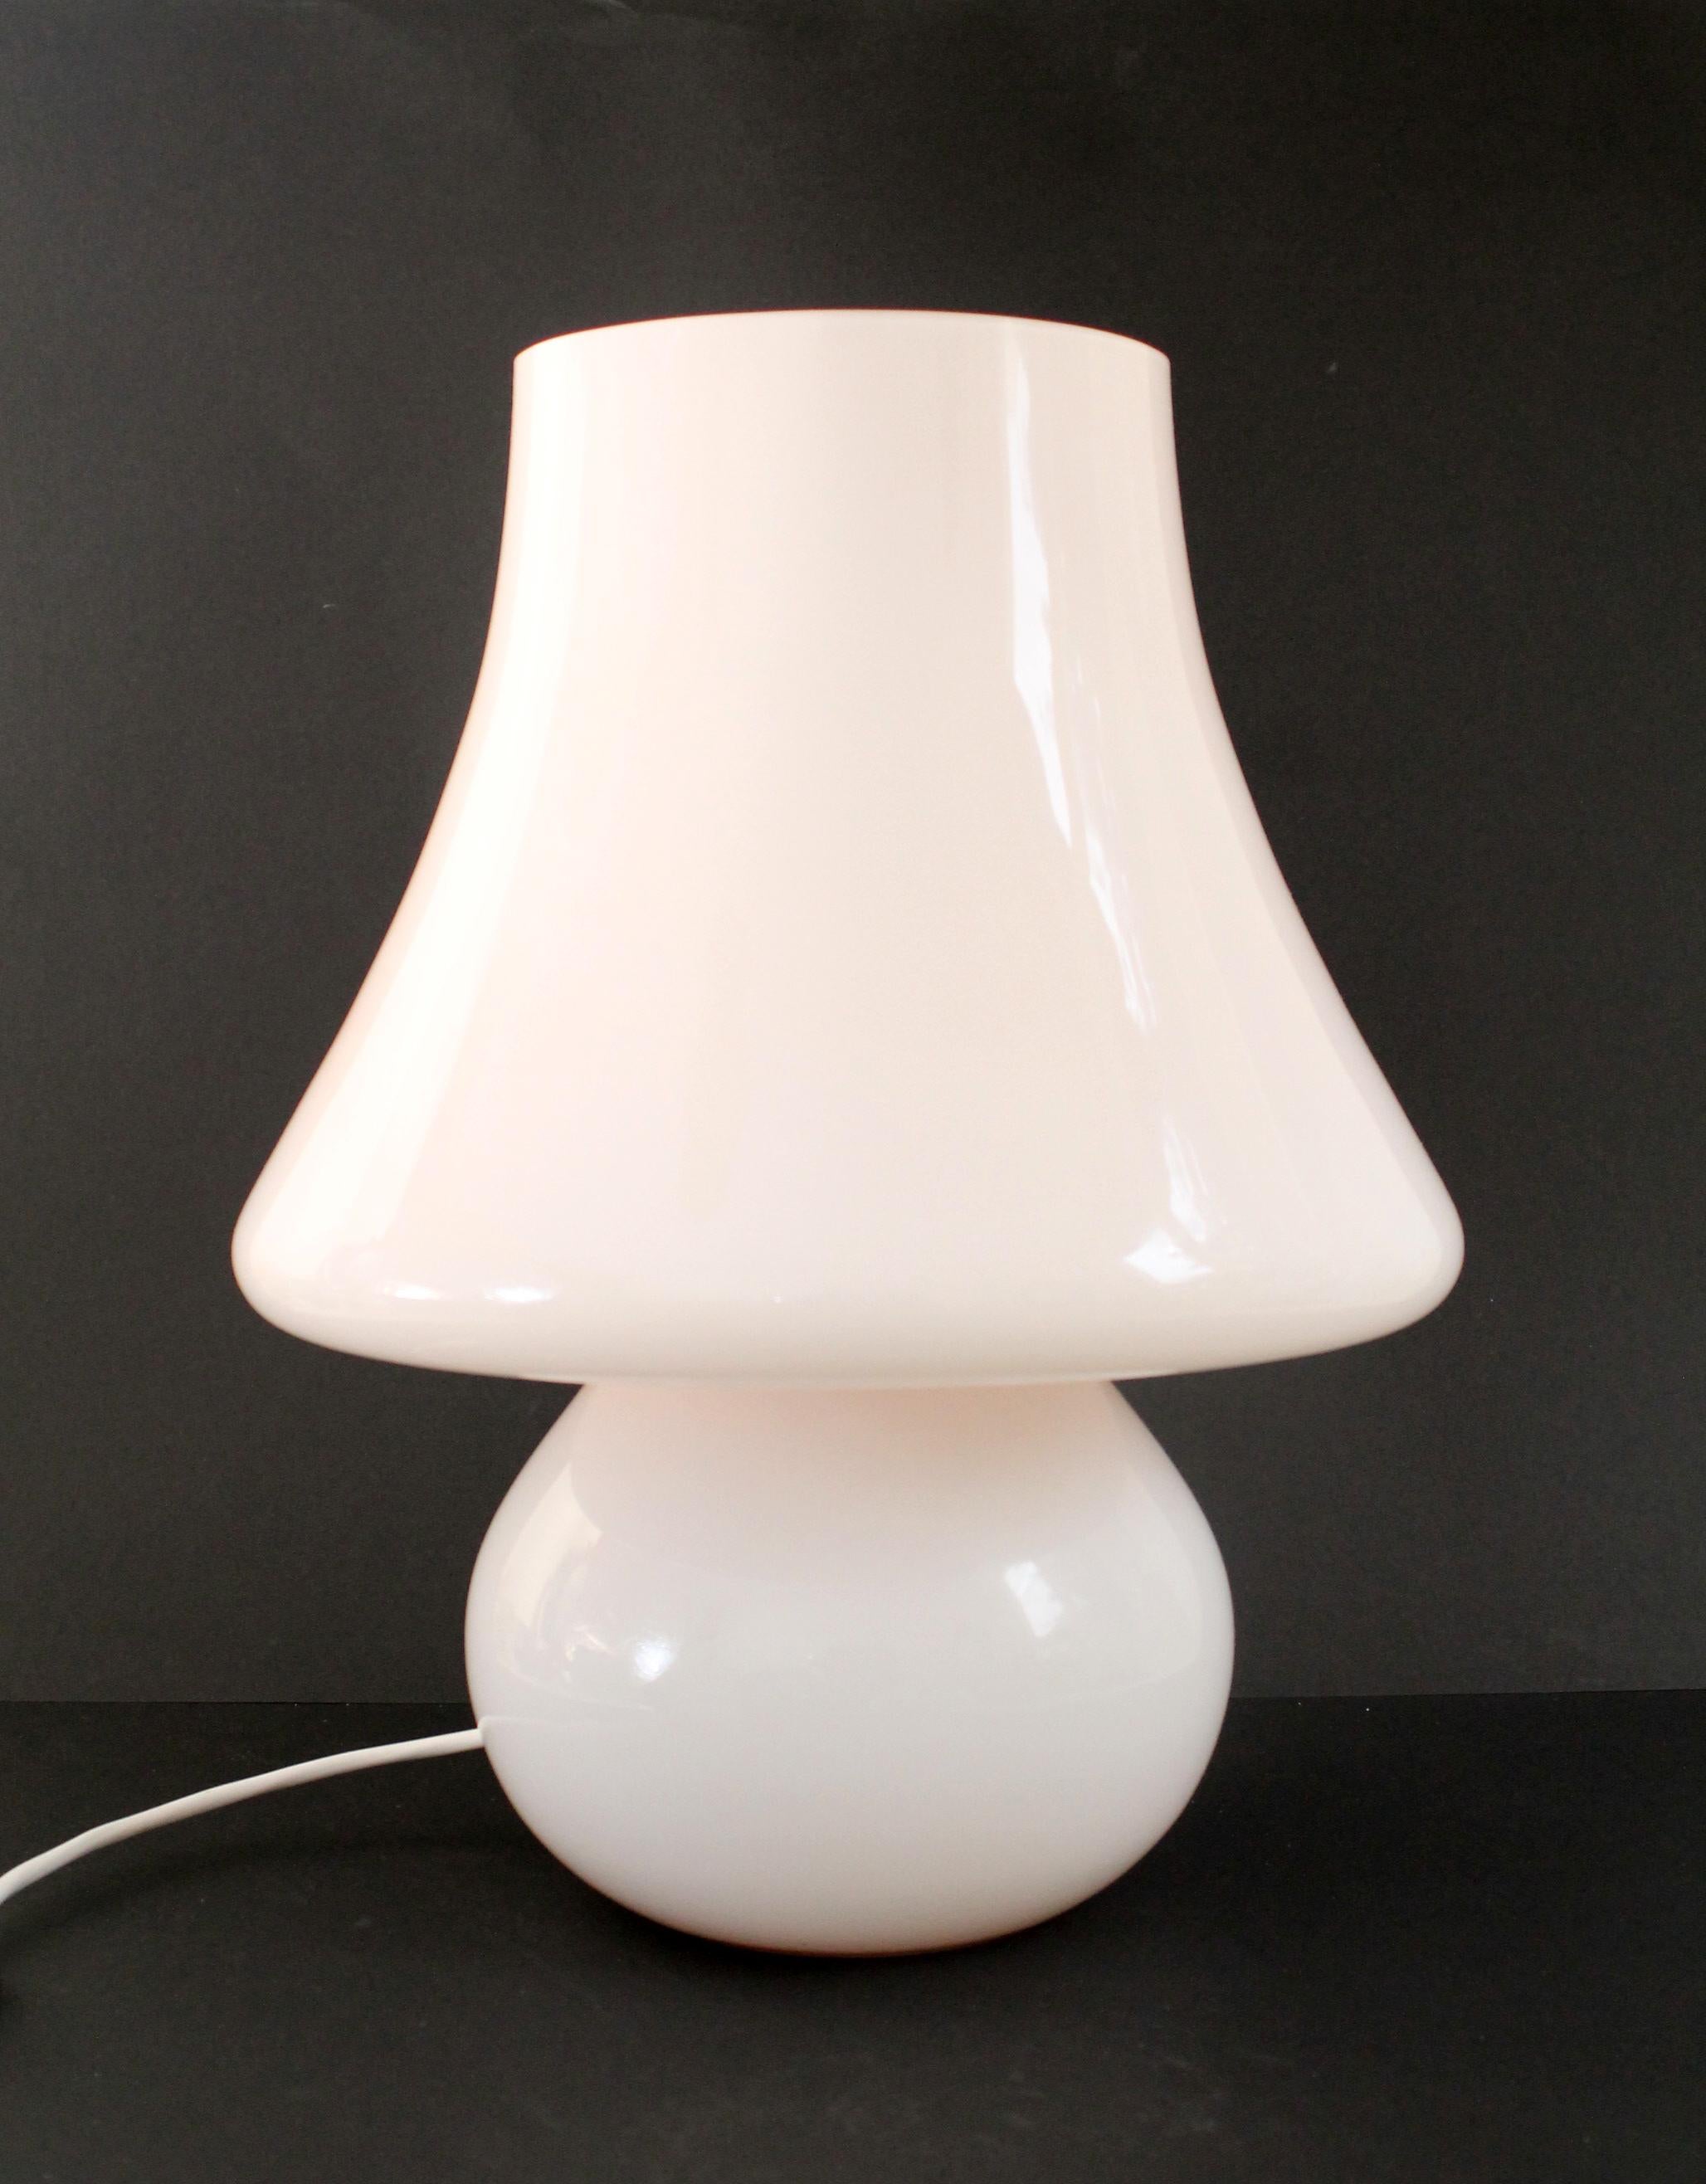 1980s Guido De Majo table floor lamp glass stunning desk/table lamp. 
Opaline (super light pink) Murano full one-piece glass. A real eye-catcher!

Designed in the 80s by Federico De Majo (Guido's Son)
Dimensions: Ø 37cm x 49cm height 
Weight: 5kgs